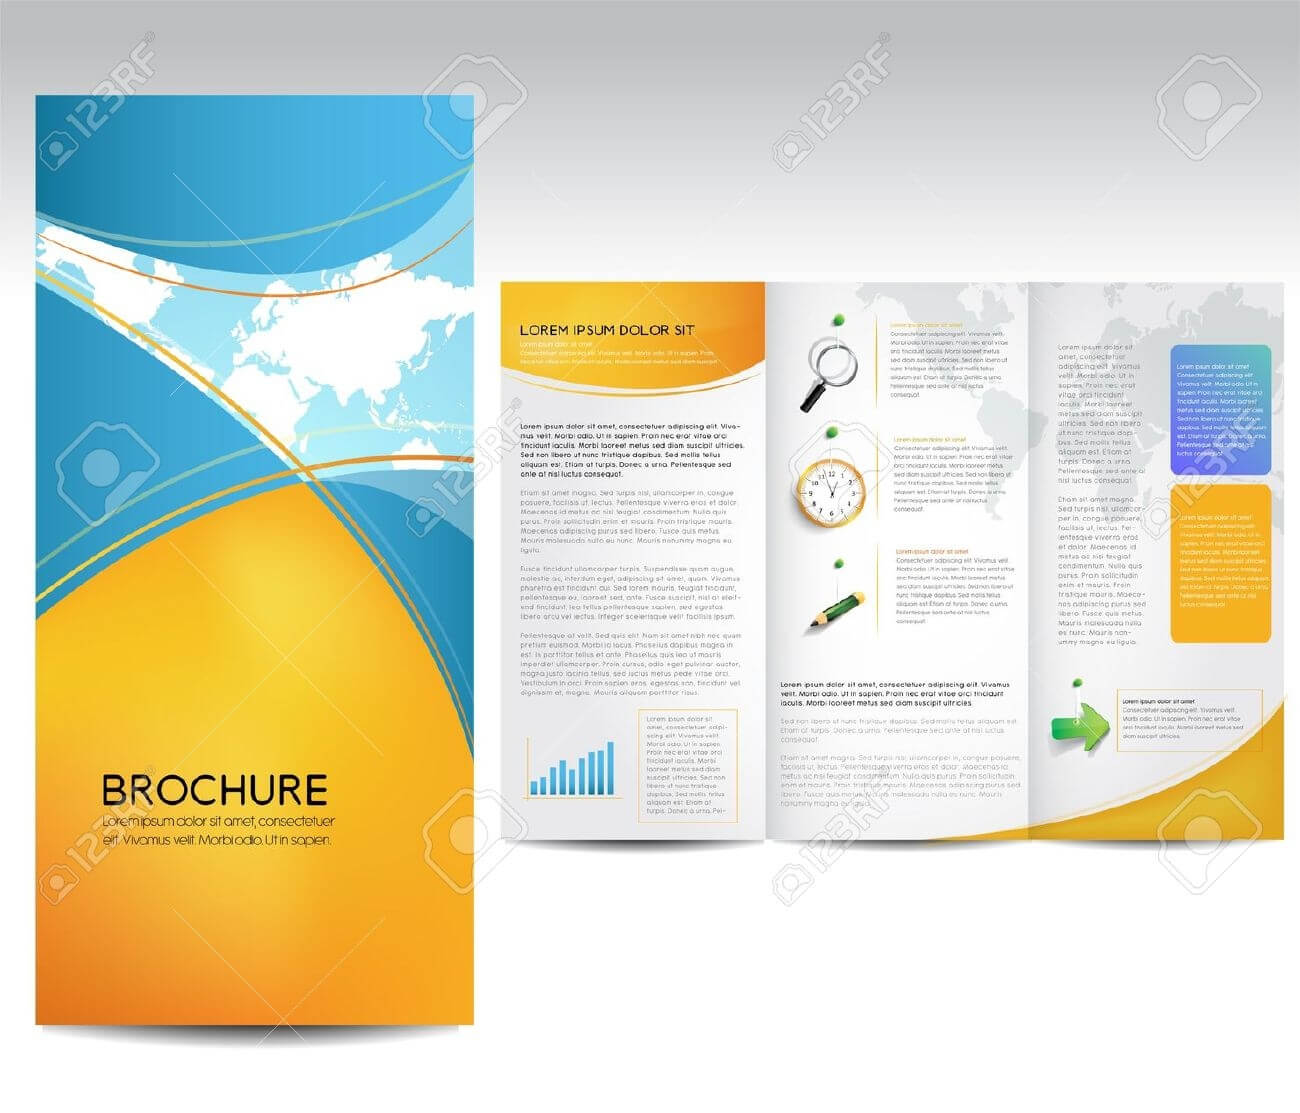 004 Template Ideas Free Brochure Templates For Word Awesome Regarding Word 2013 Brochure Template